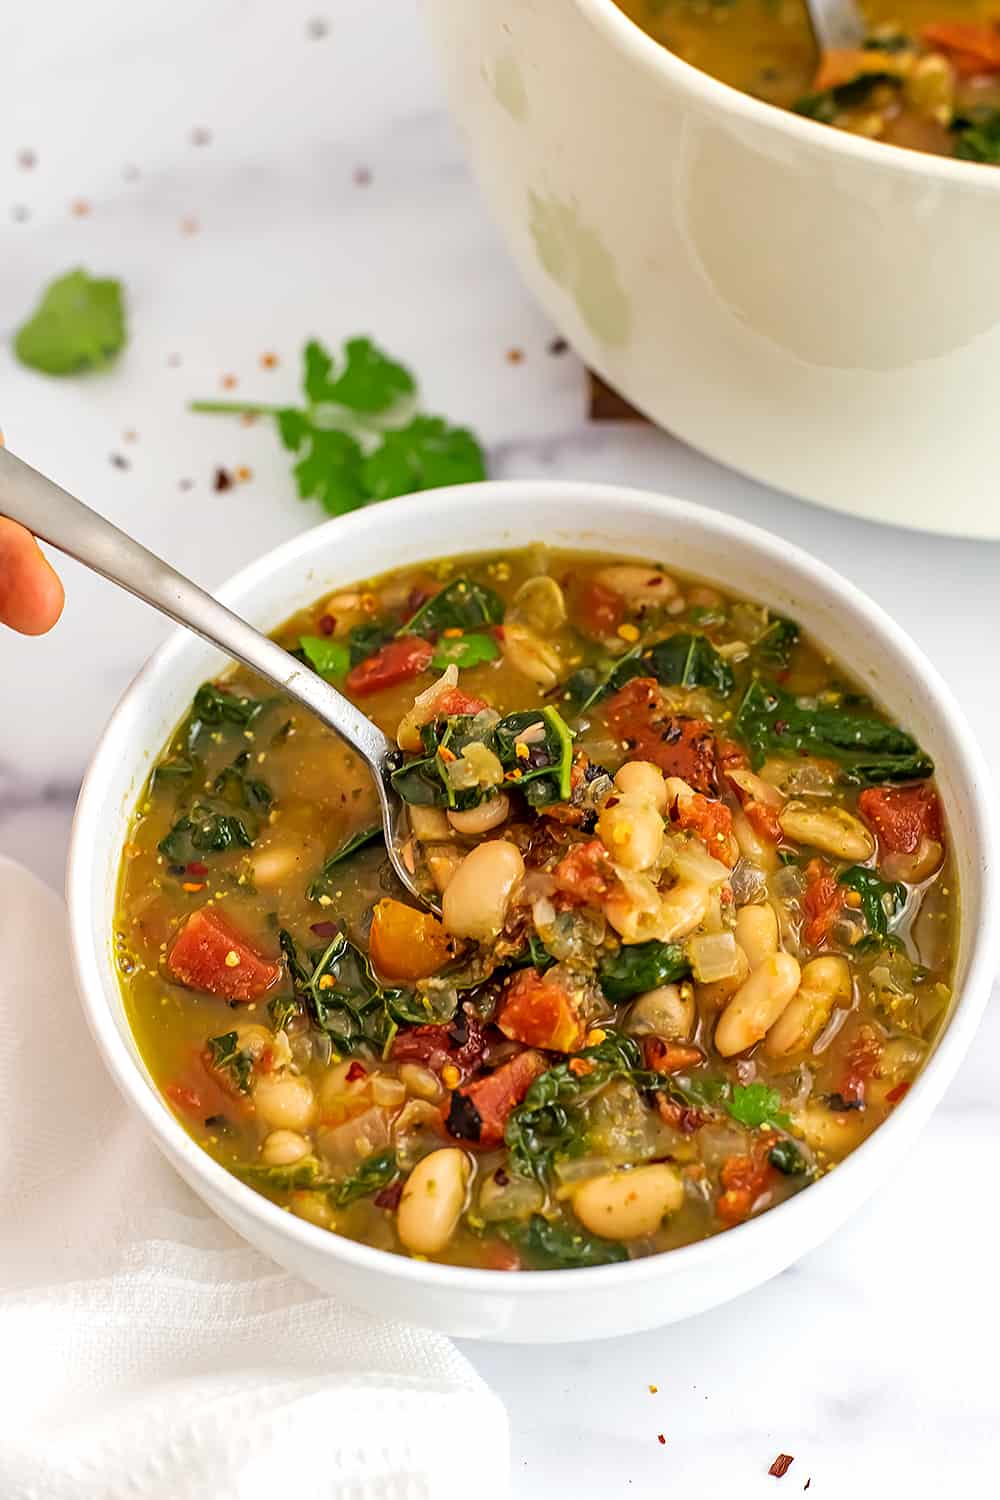 Spicy White Bean Stew - Quick, Easy, 20 Minutes | Bites of Wellness